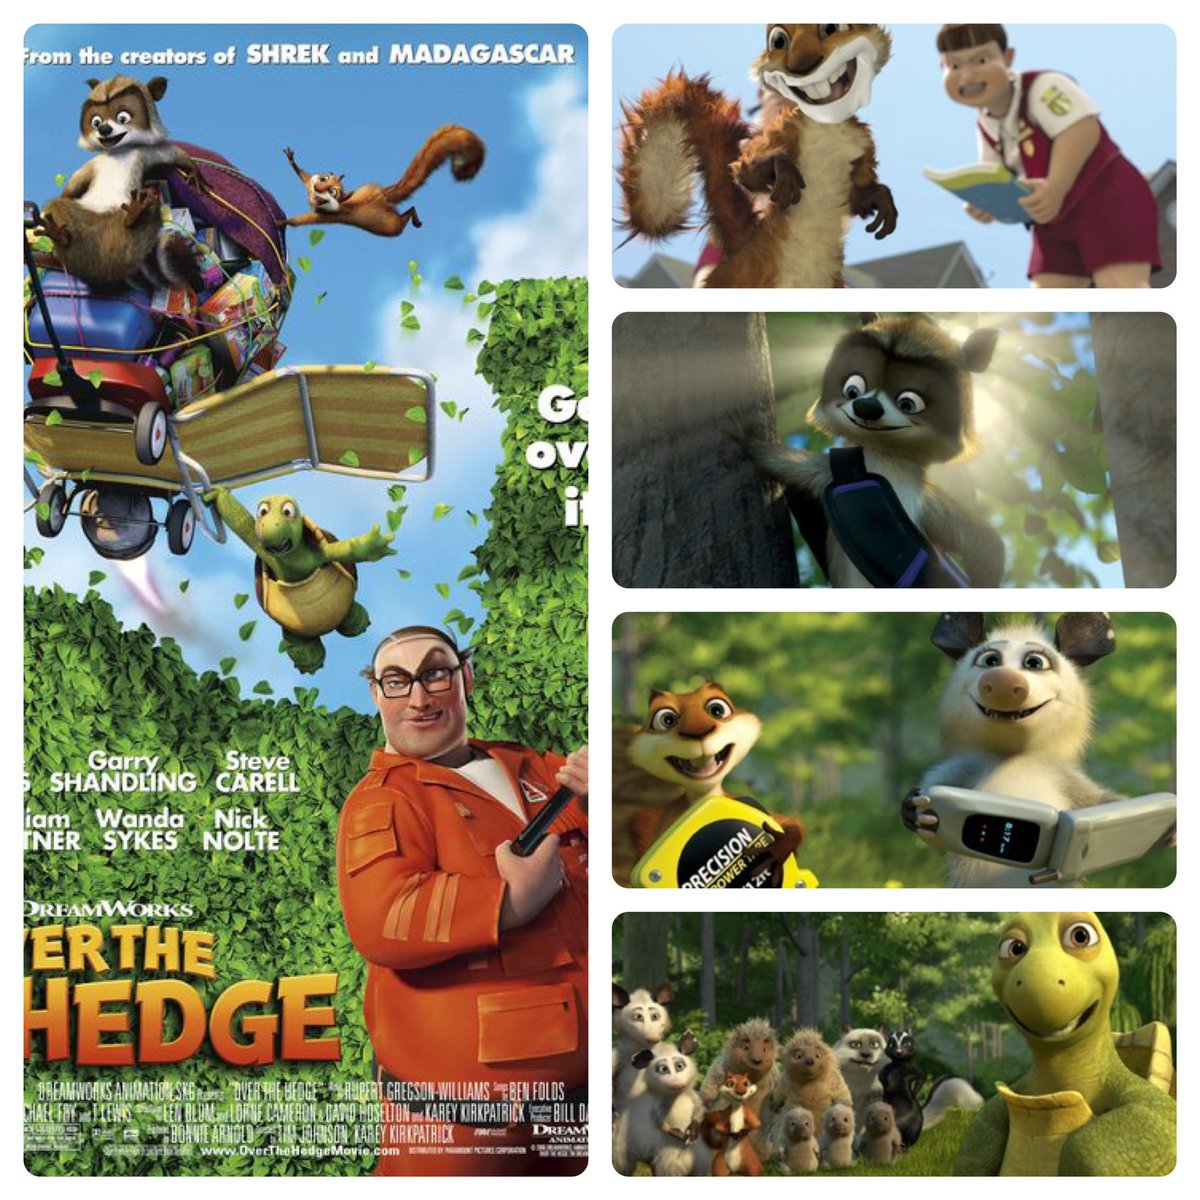 Over the Hedge celebrates 18th anniversary today.
#overthehedge #brucewillis #garryshandling #stevecarell #stevecarrell #williamshatner #wandasykes #nicknolte #paramount #paramountpictures #paramountstudios  #dreamworks #dreamworksanimation #dreamworksanimationstudios #animation